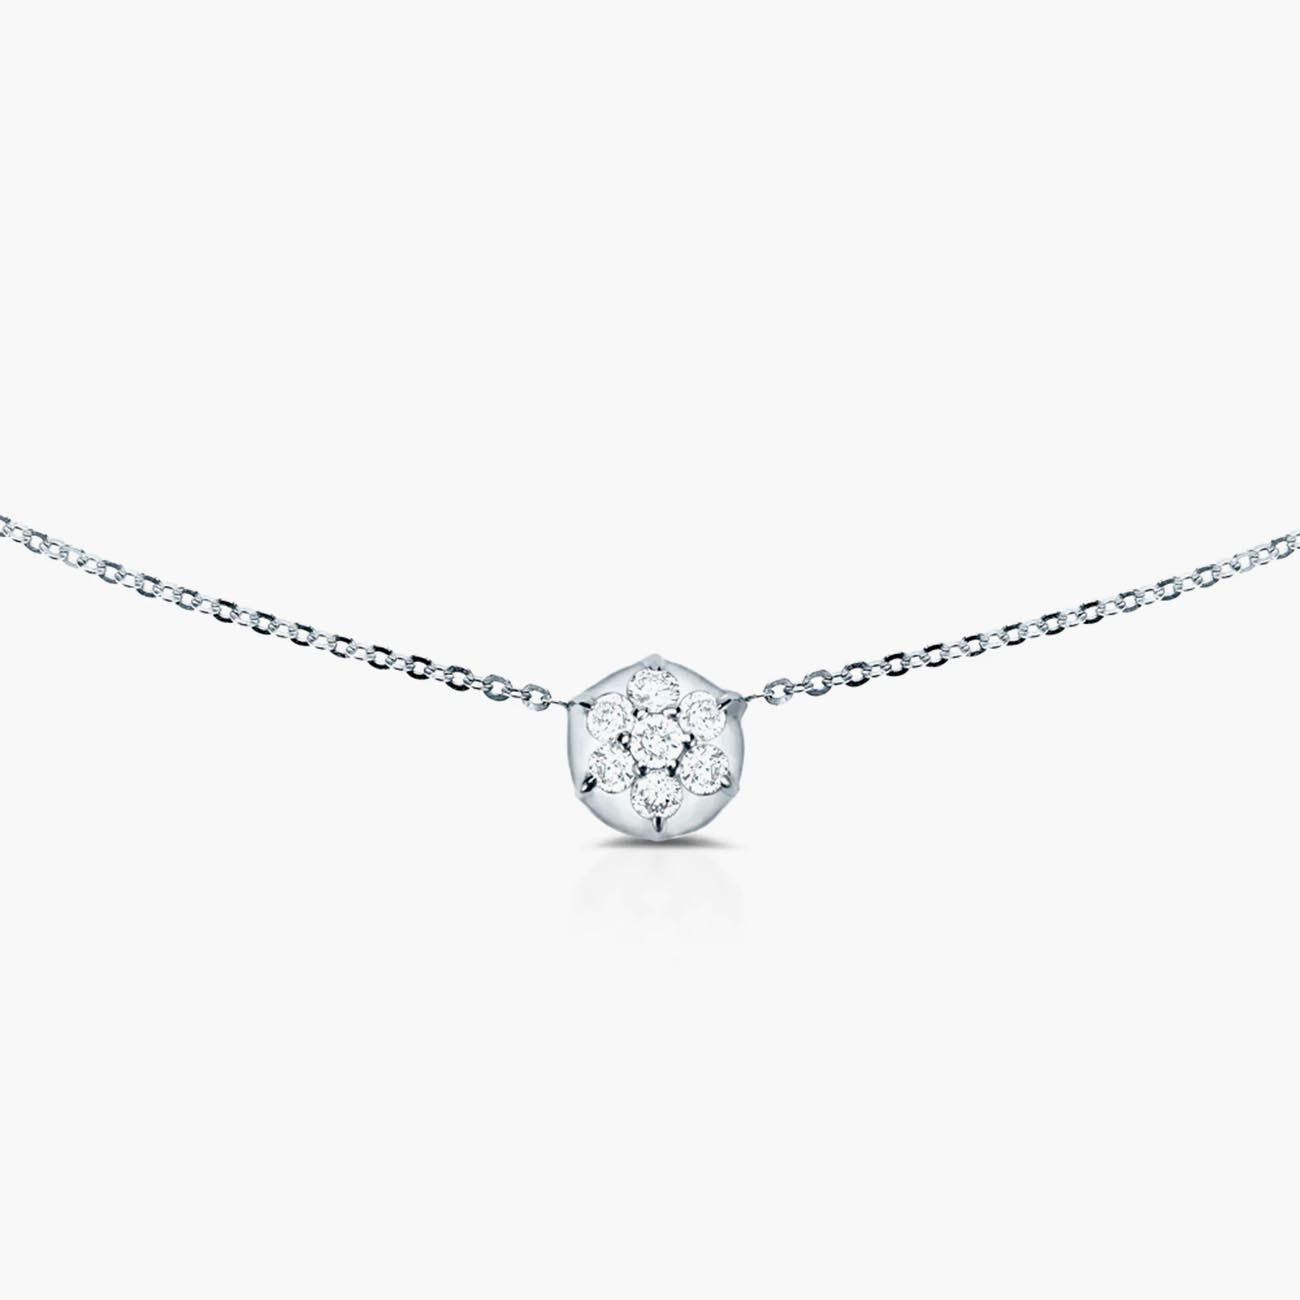 White Gold Bullet Diamond Choker Necklace by Carbon & Hyde 